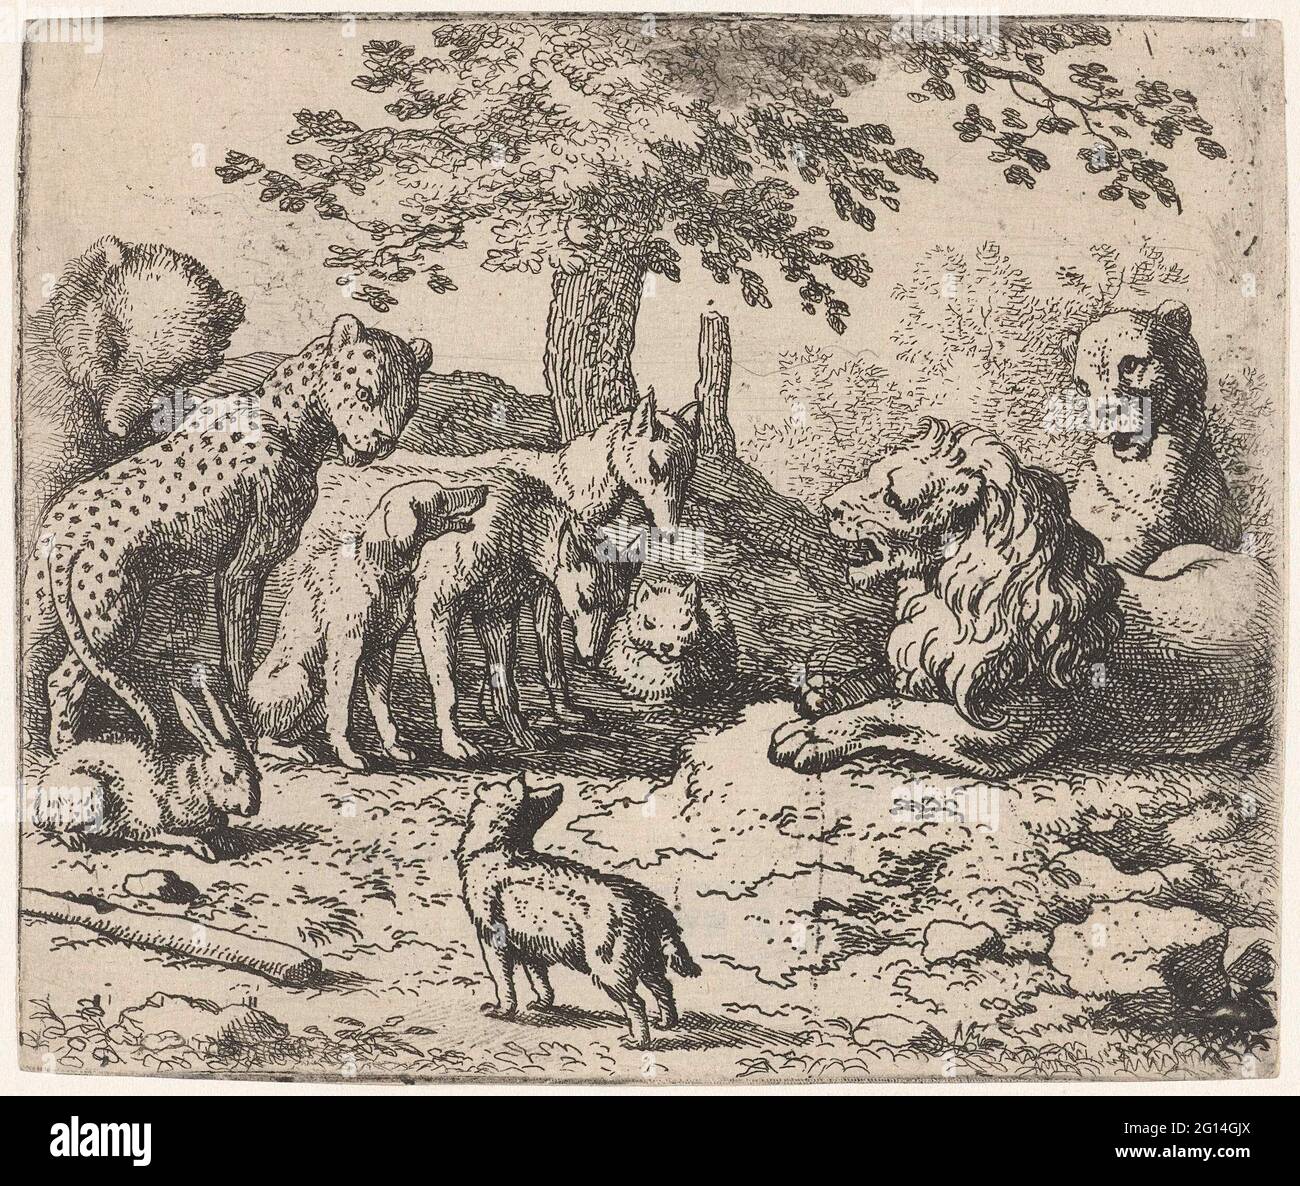 Consulting of King Nobel; Reinaert de Vos. The lion, king Nobel, deliberates with the other animals, including Fyrapel the leopard, bruun the bear and cuwaert the rabbit. Stock Photo